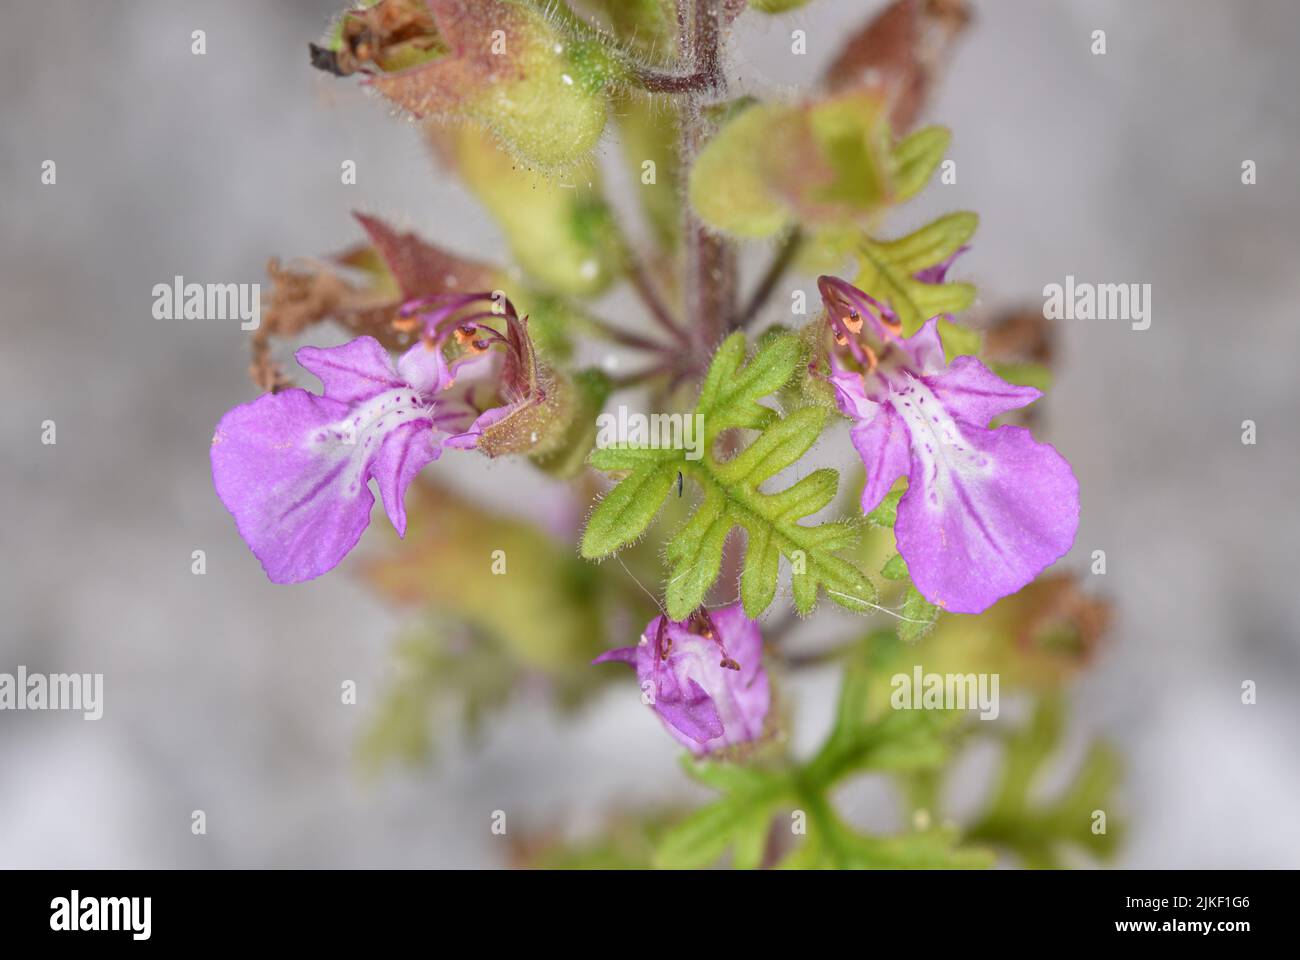 Cut-leaved Germander - Teucrium botrys Stock Photo